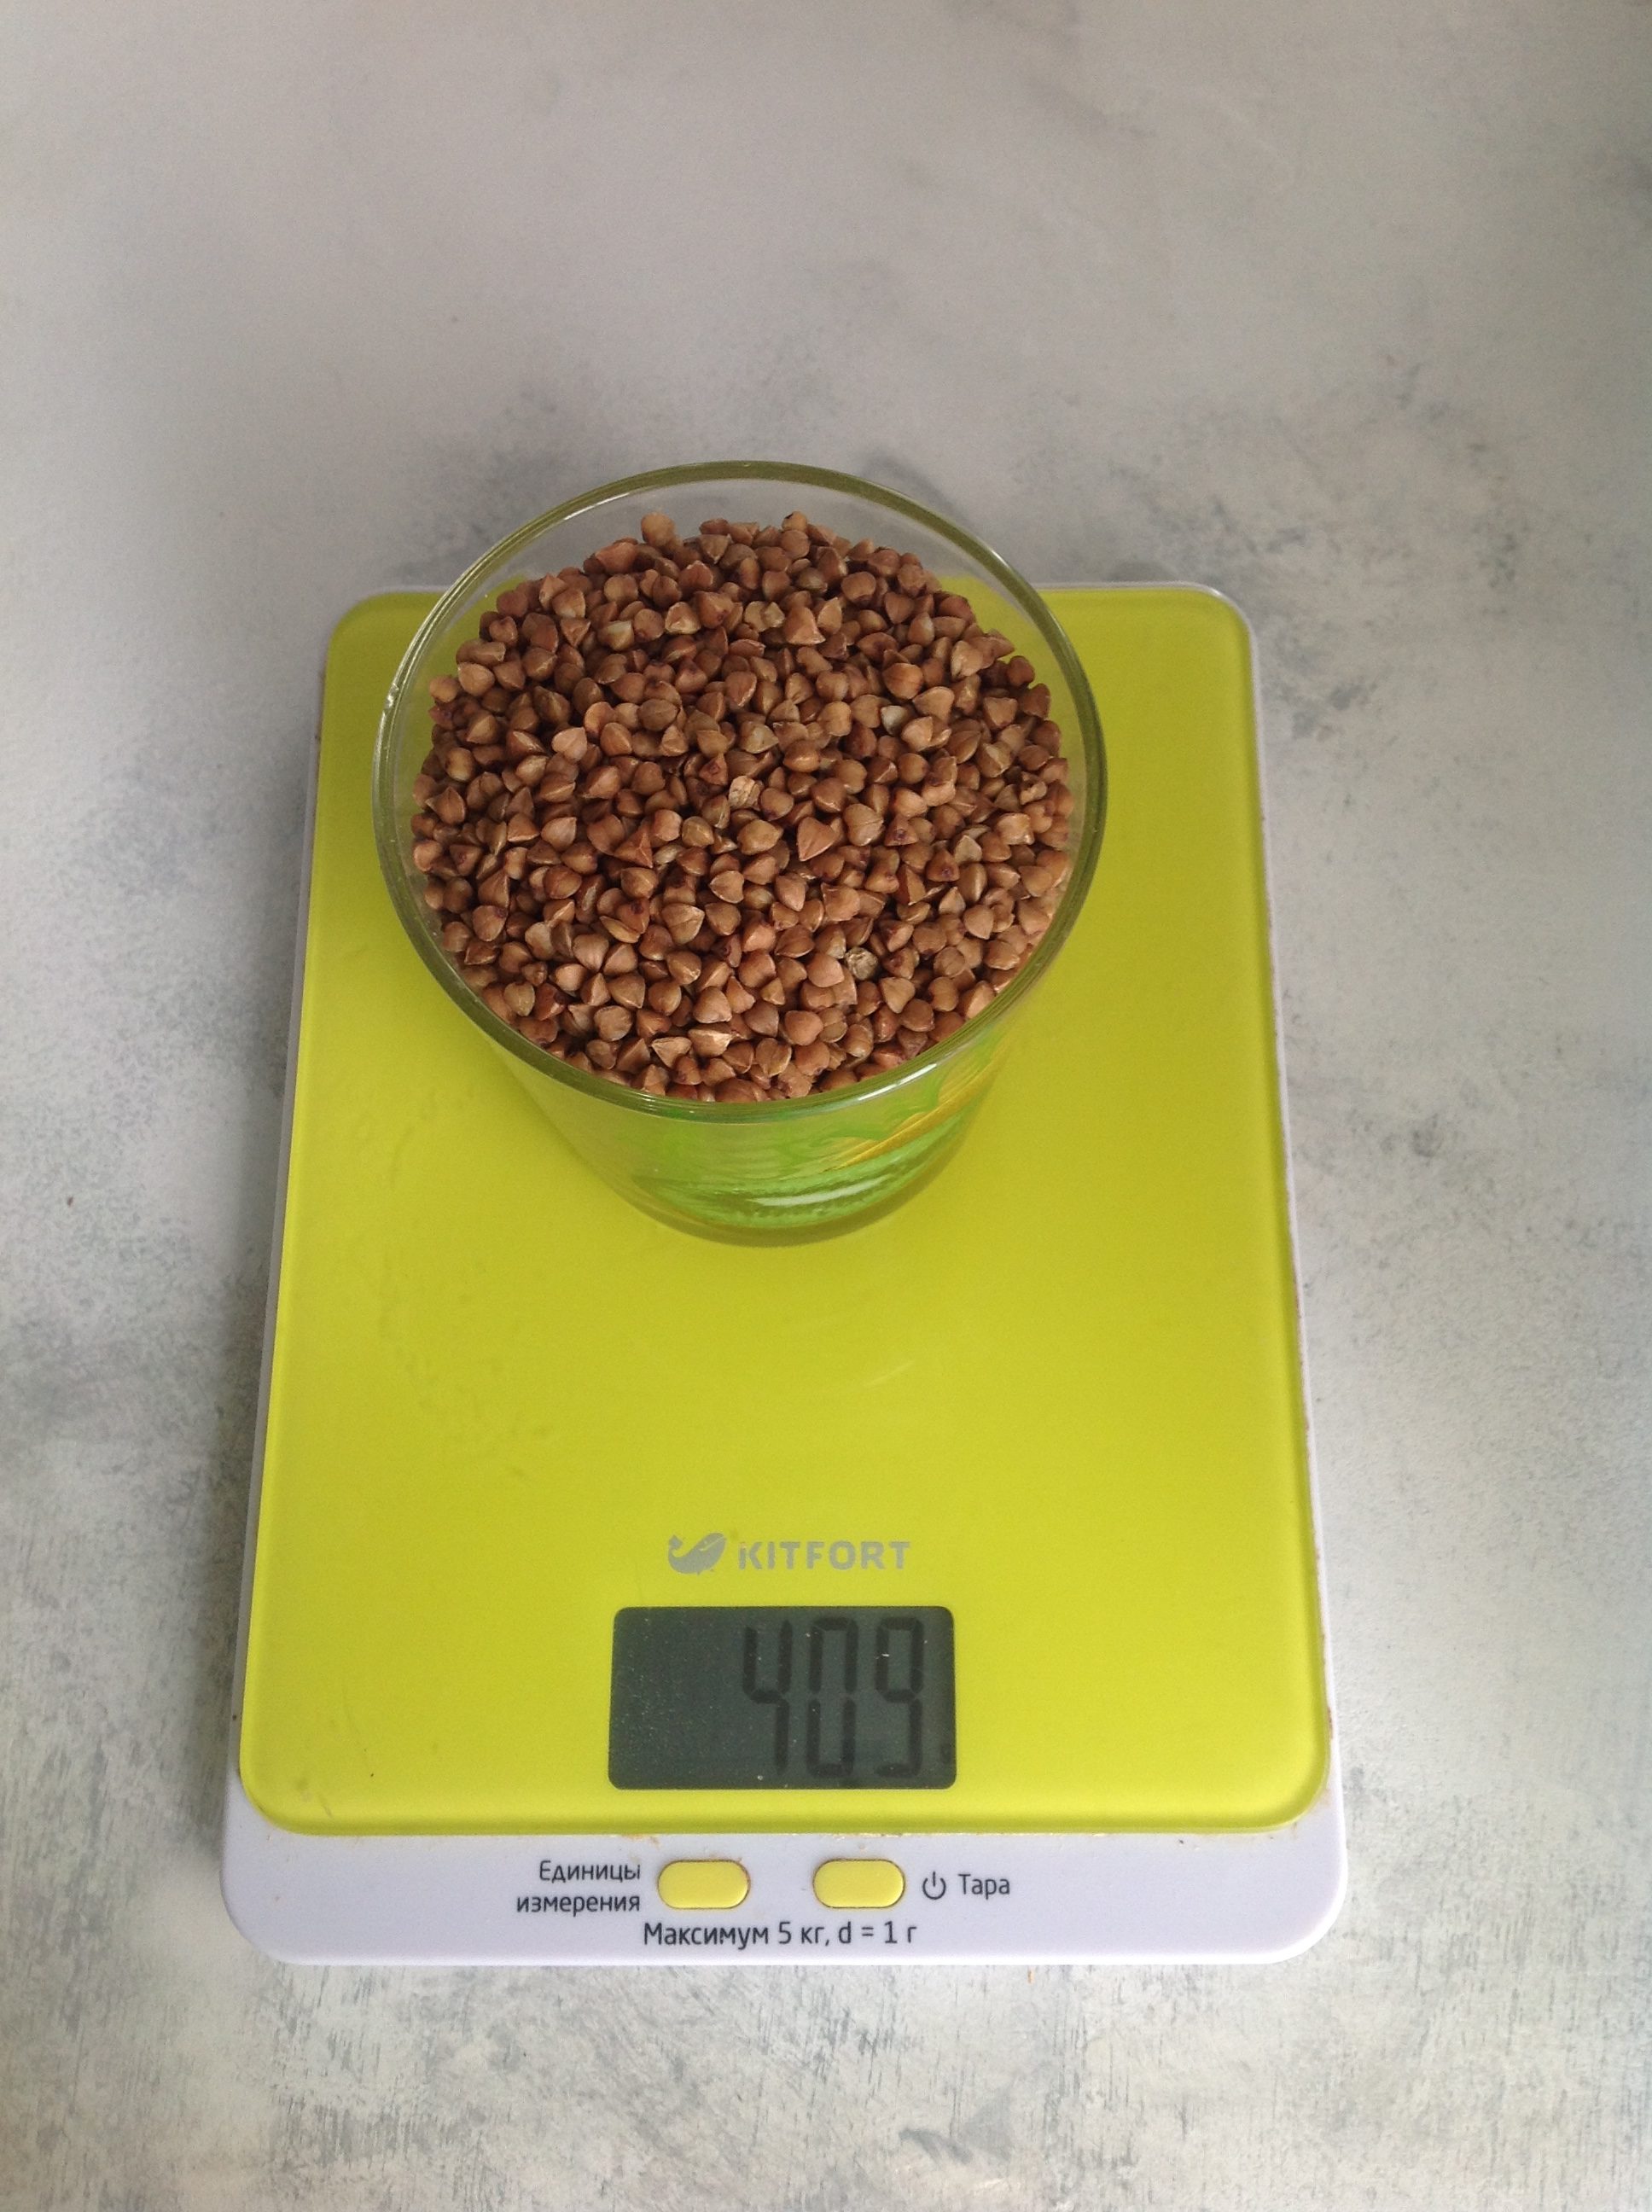 How much does dry buckwheat weigh in a glass of 250 ml?